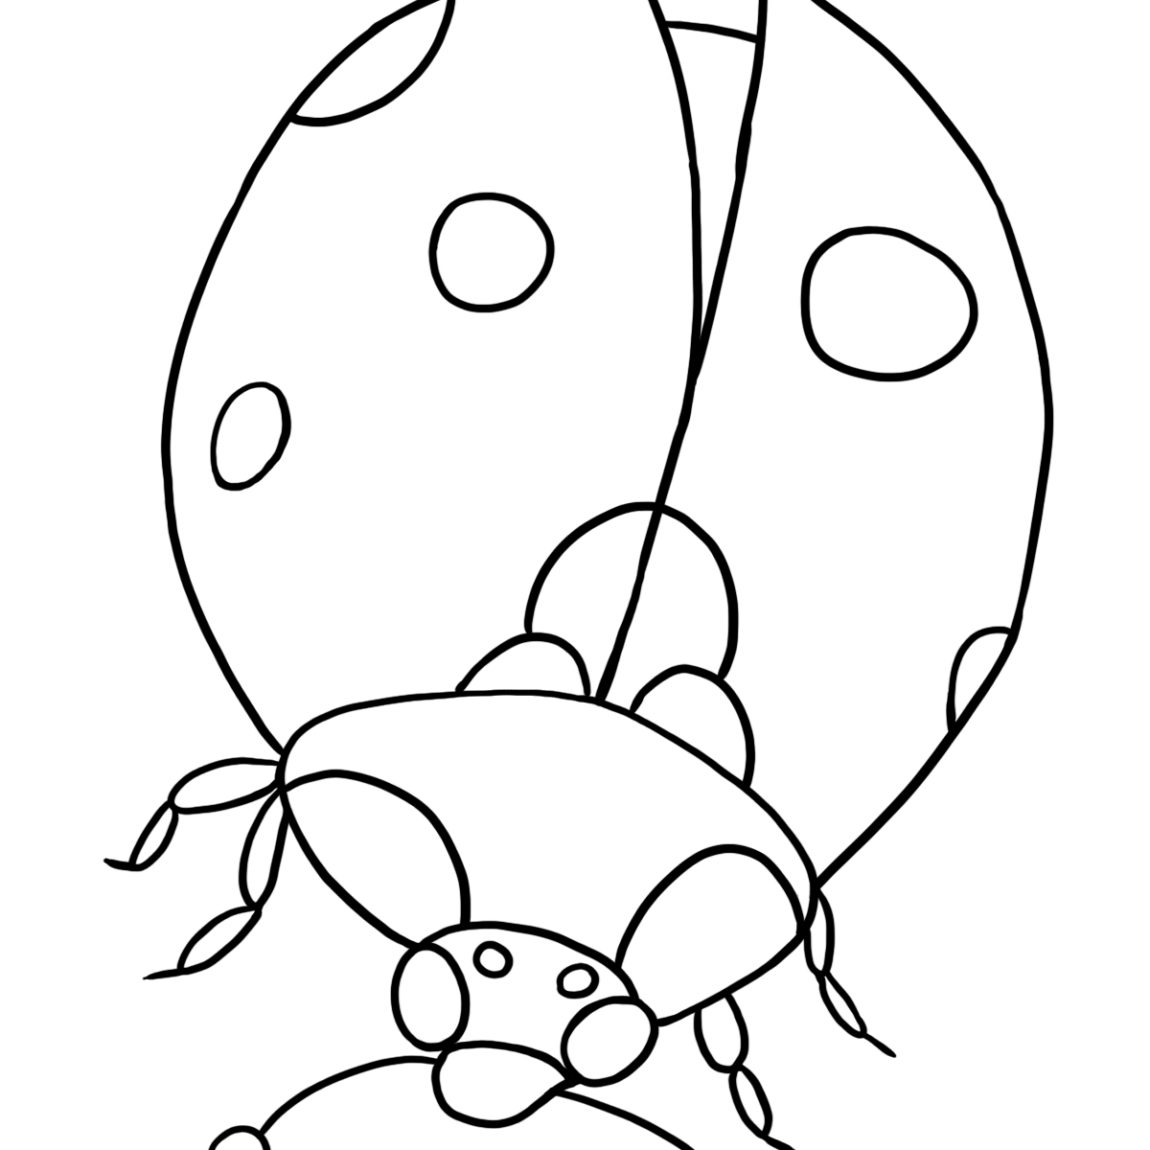 l is for ladybug free ladybug coloring pages at getcoloringscom free for is l ladybug 